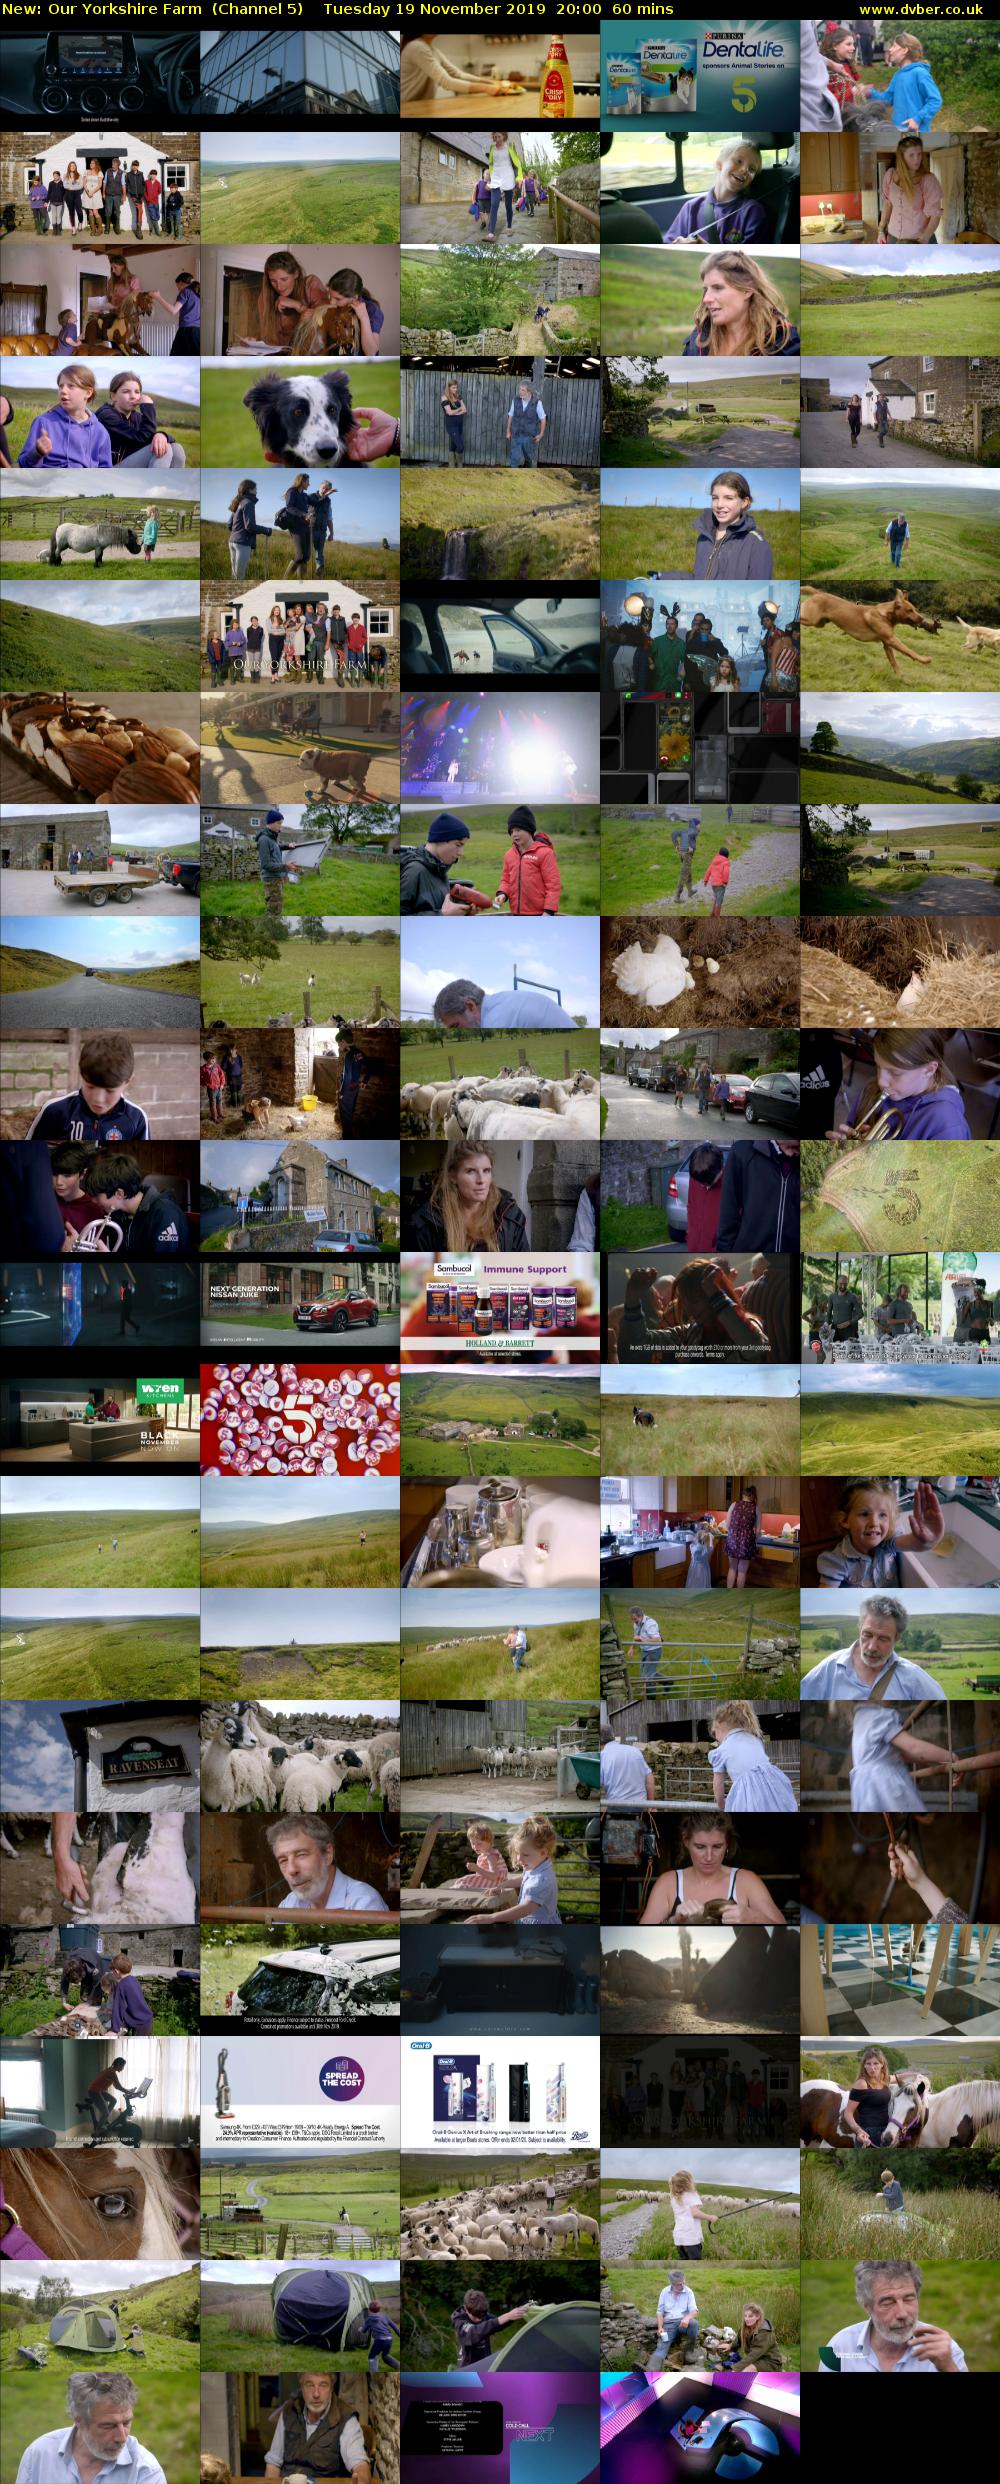 Our Yorkshire Farm (Channel 5) Tuesday 19 November 2019 20:00 - 21:00